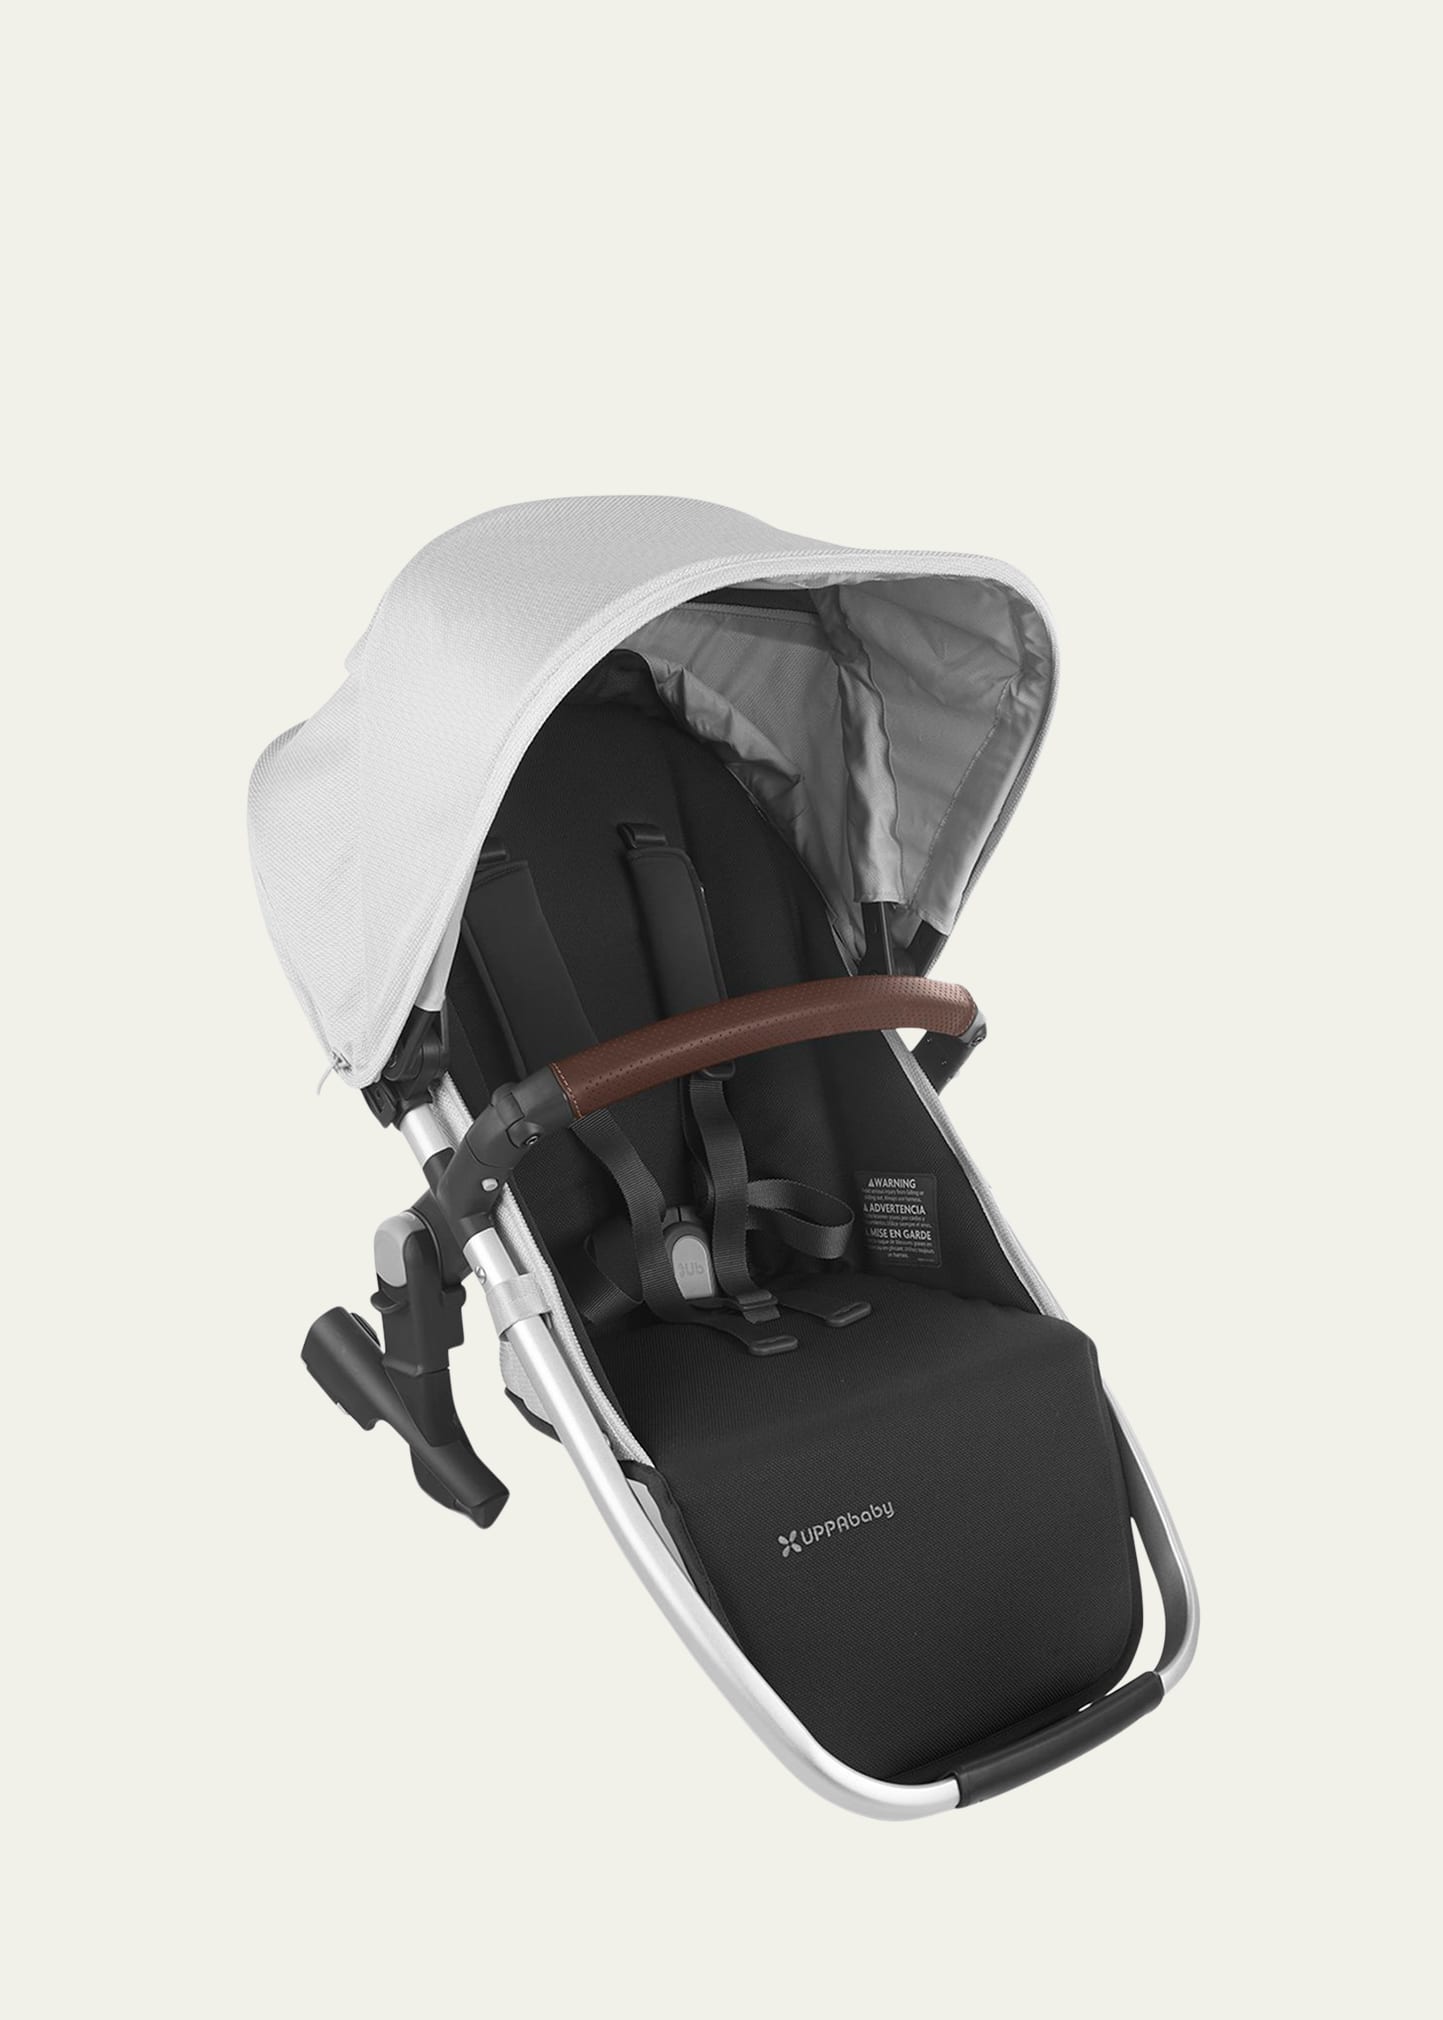 UPPABABY RUMBLESEAT V2